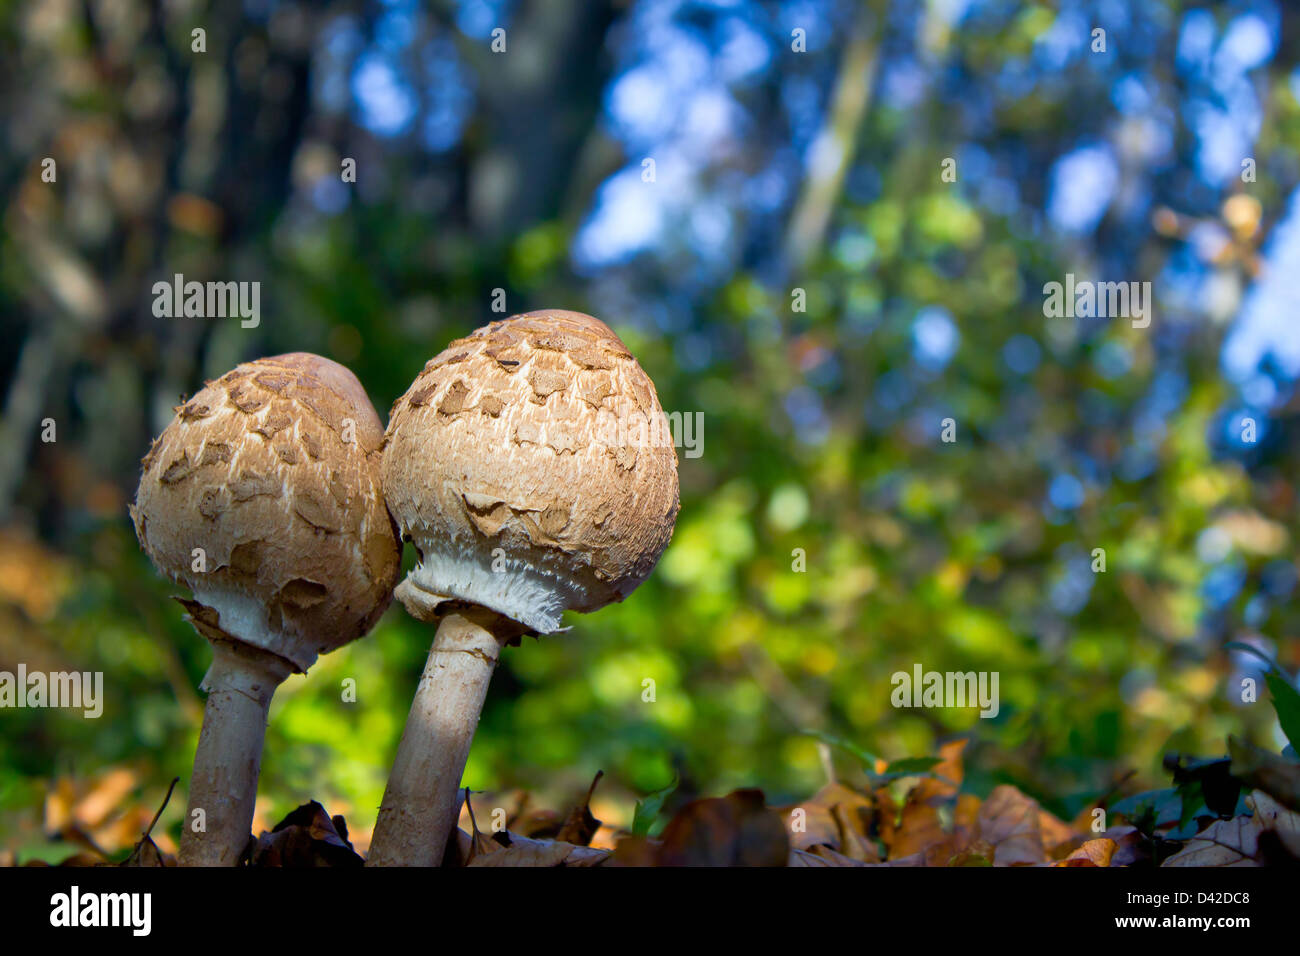 Pair of young closed parasol mushrooms in natural forest environment - Macrolepiota procera Stock Photo